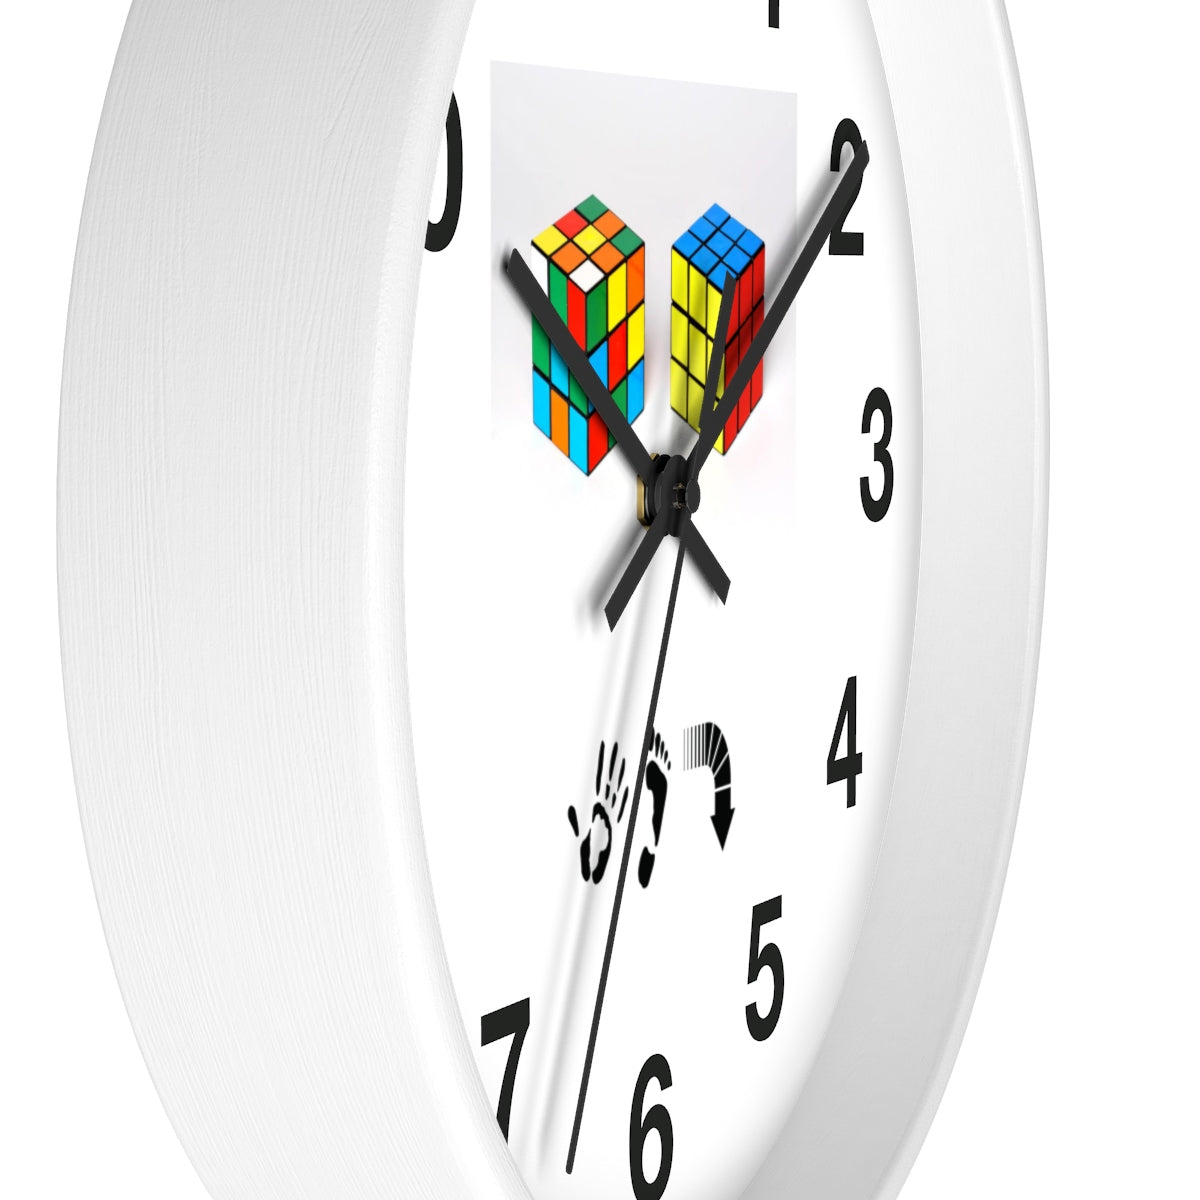 Five Toes Down Cube Wall clock